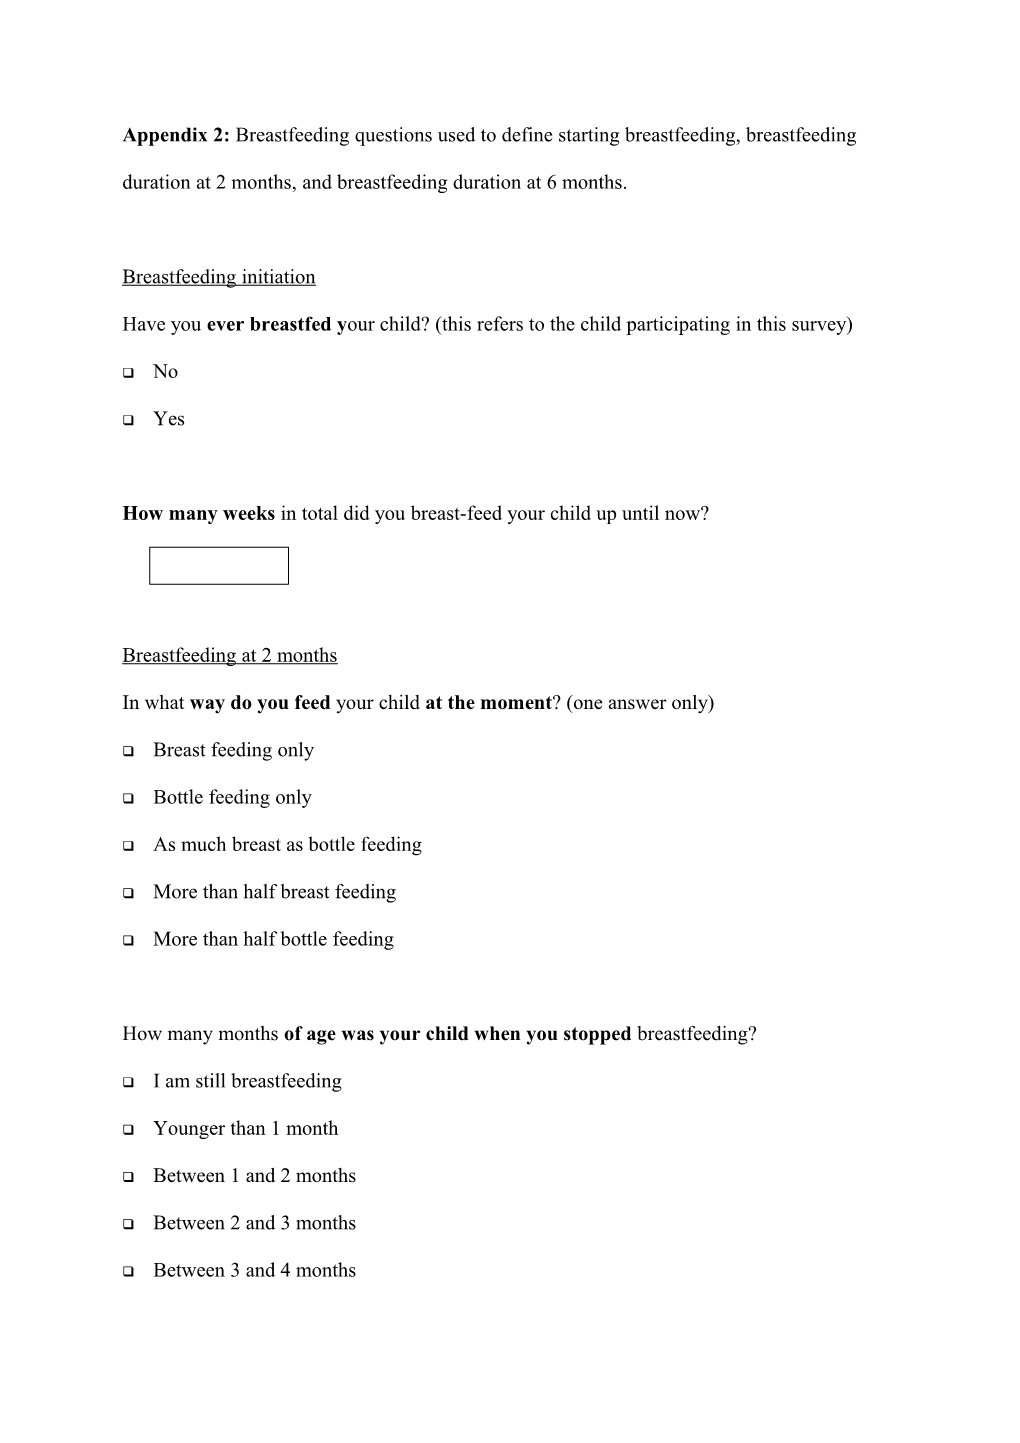 Appendix 1: Breastfeeding Questions Used to Define Starting Breastfeeding, Breastfeeding